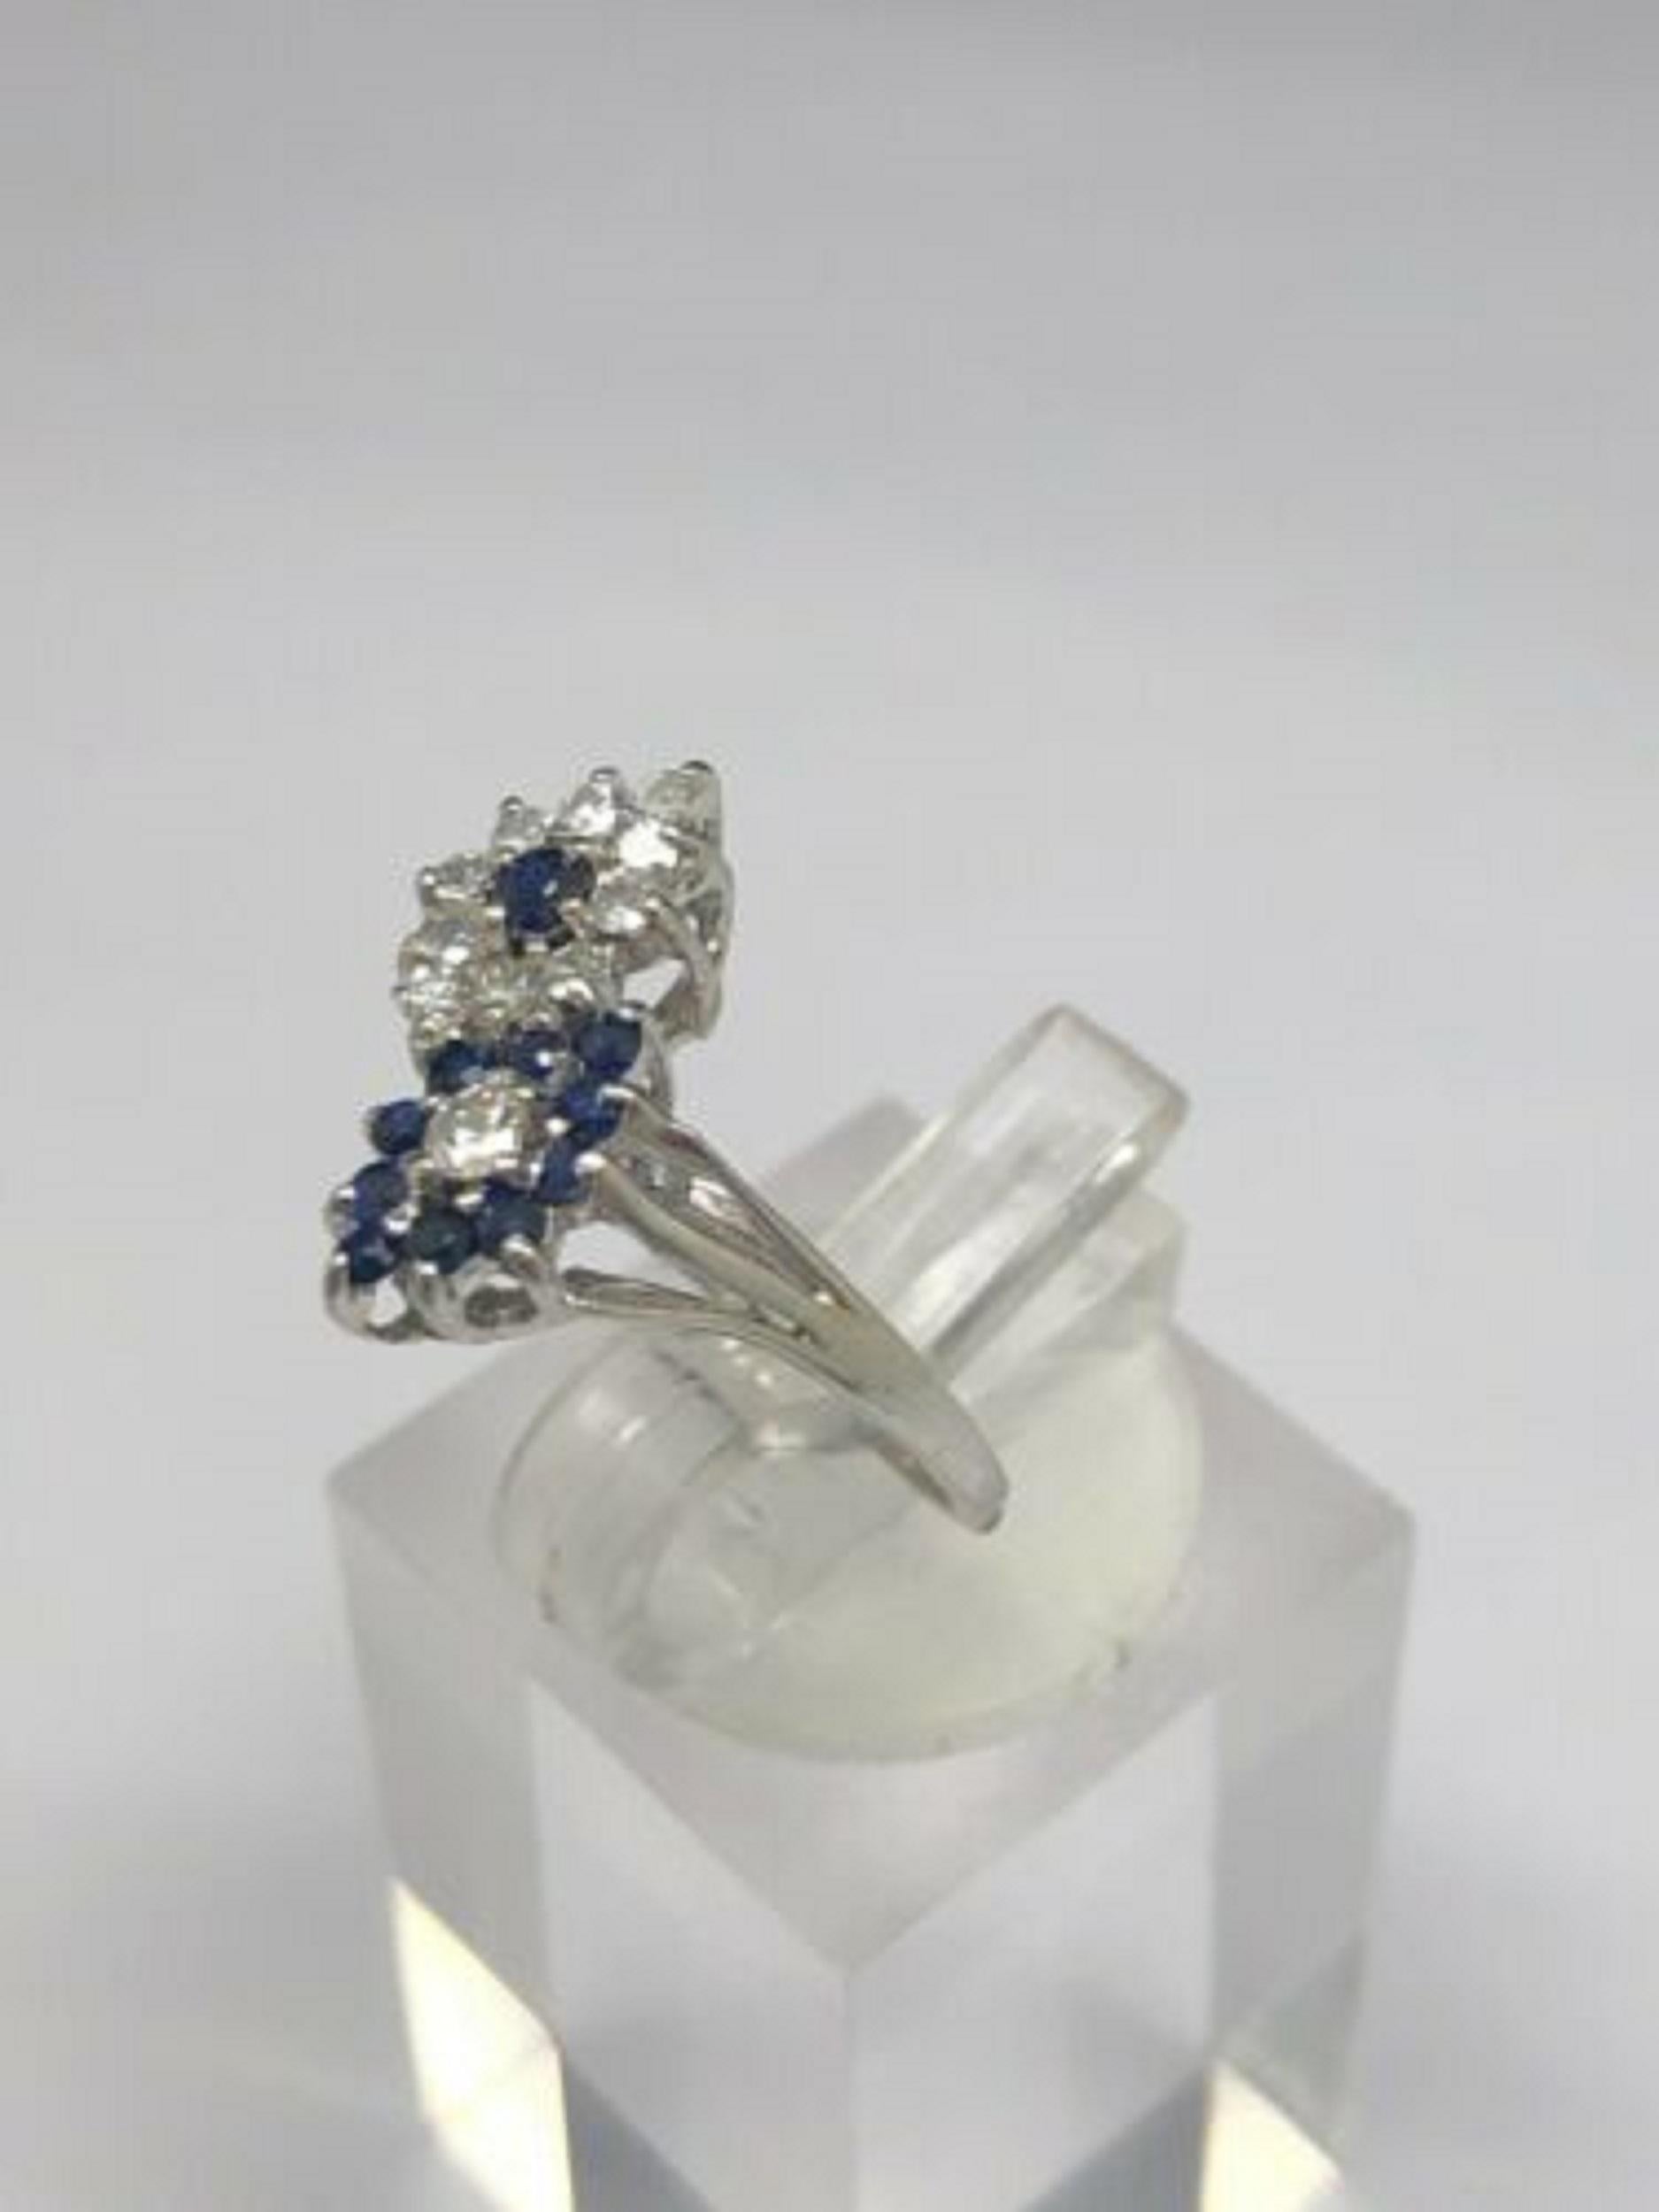  Up for sale:

This absolutely stunning vintage solid 14k white gold round cut natural diamond and round cut natural blue sapphire gemstone cocktail ring. This ring is featuring approx 0.50ctw in round cut natural blue sapphire gemstones and round